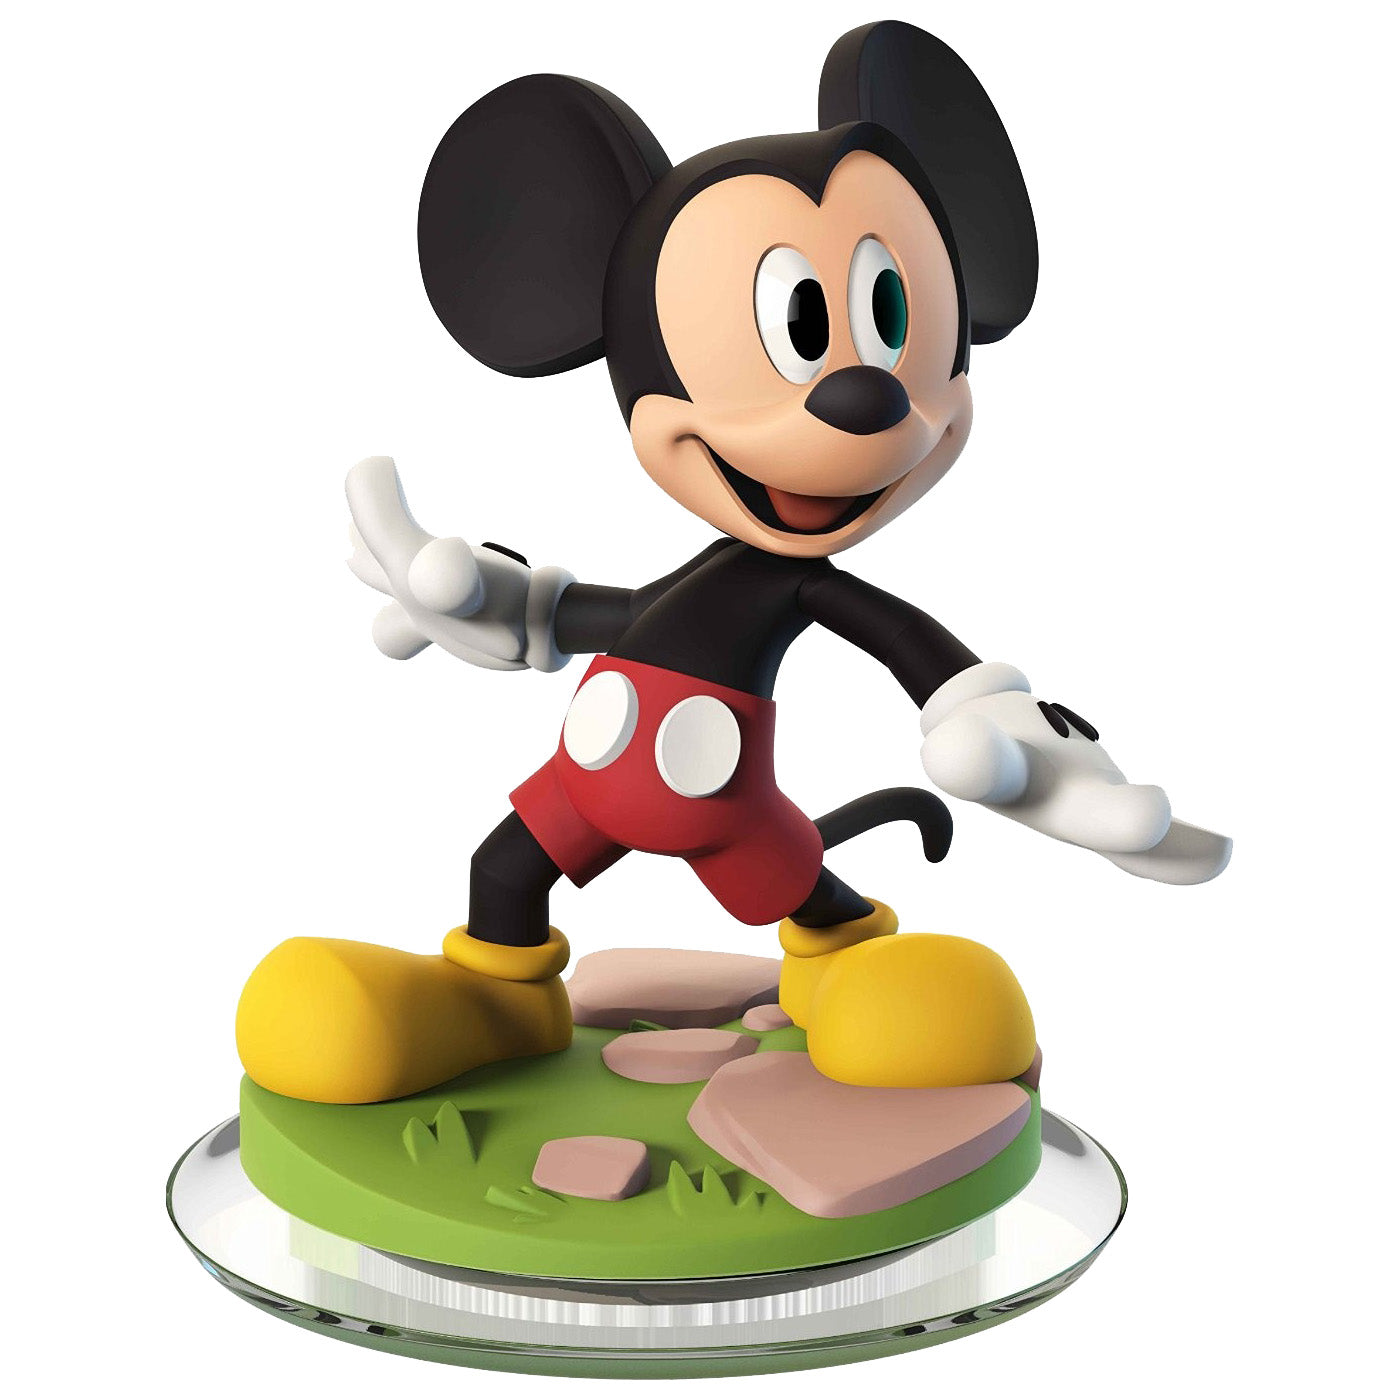 Disney Infinity 3.0 Character: Mickey Mouse